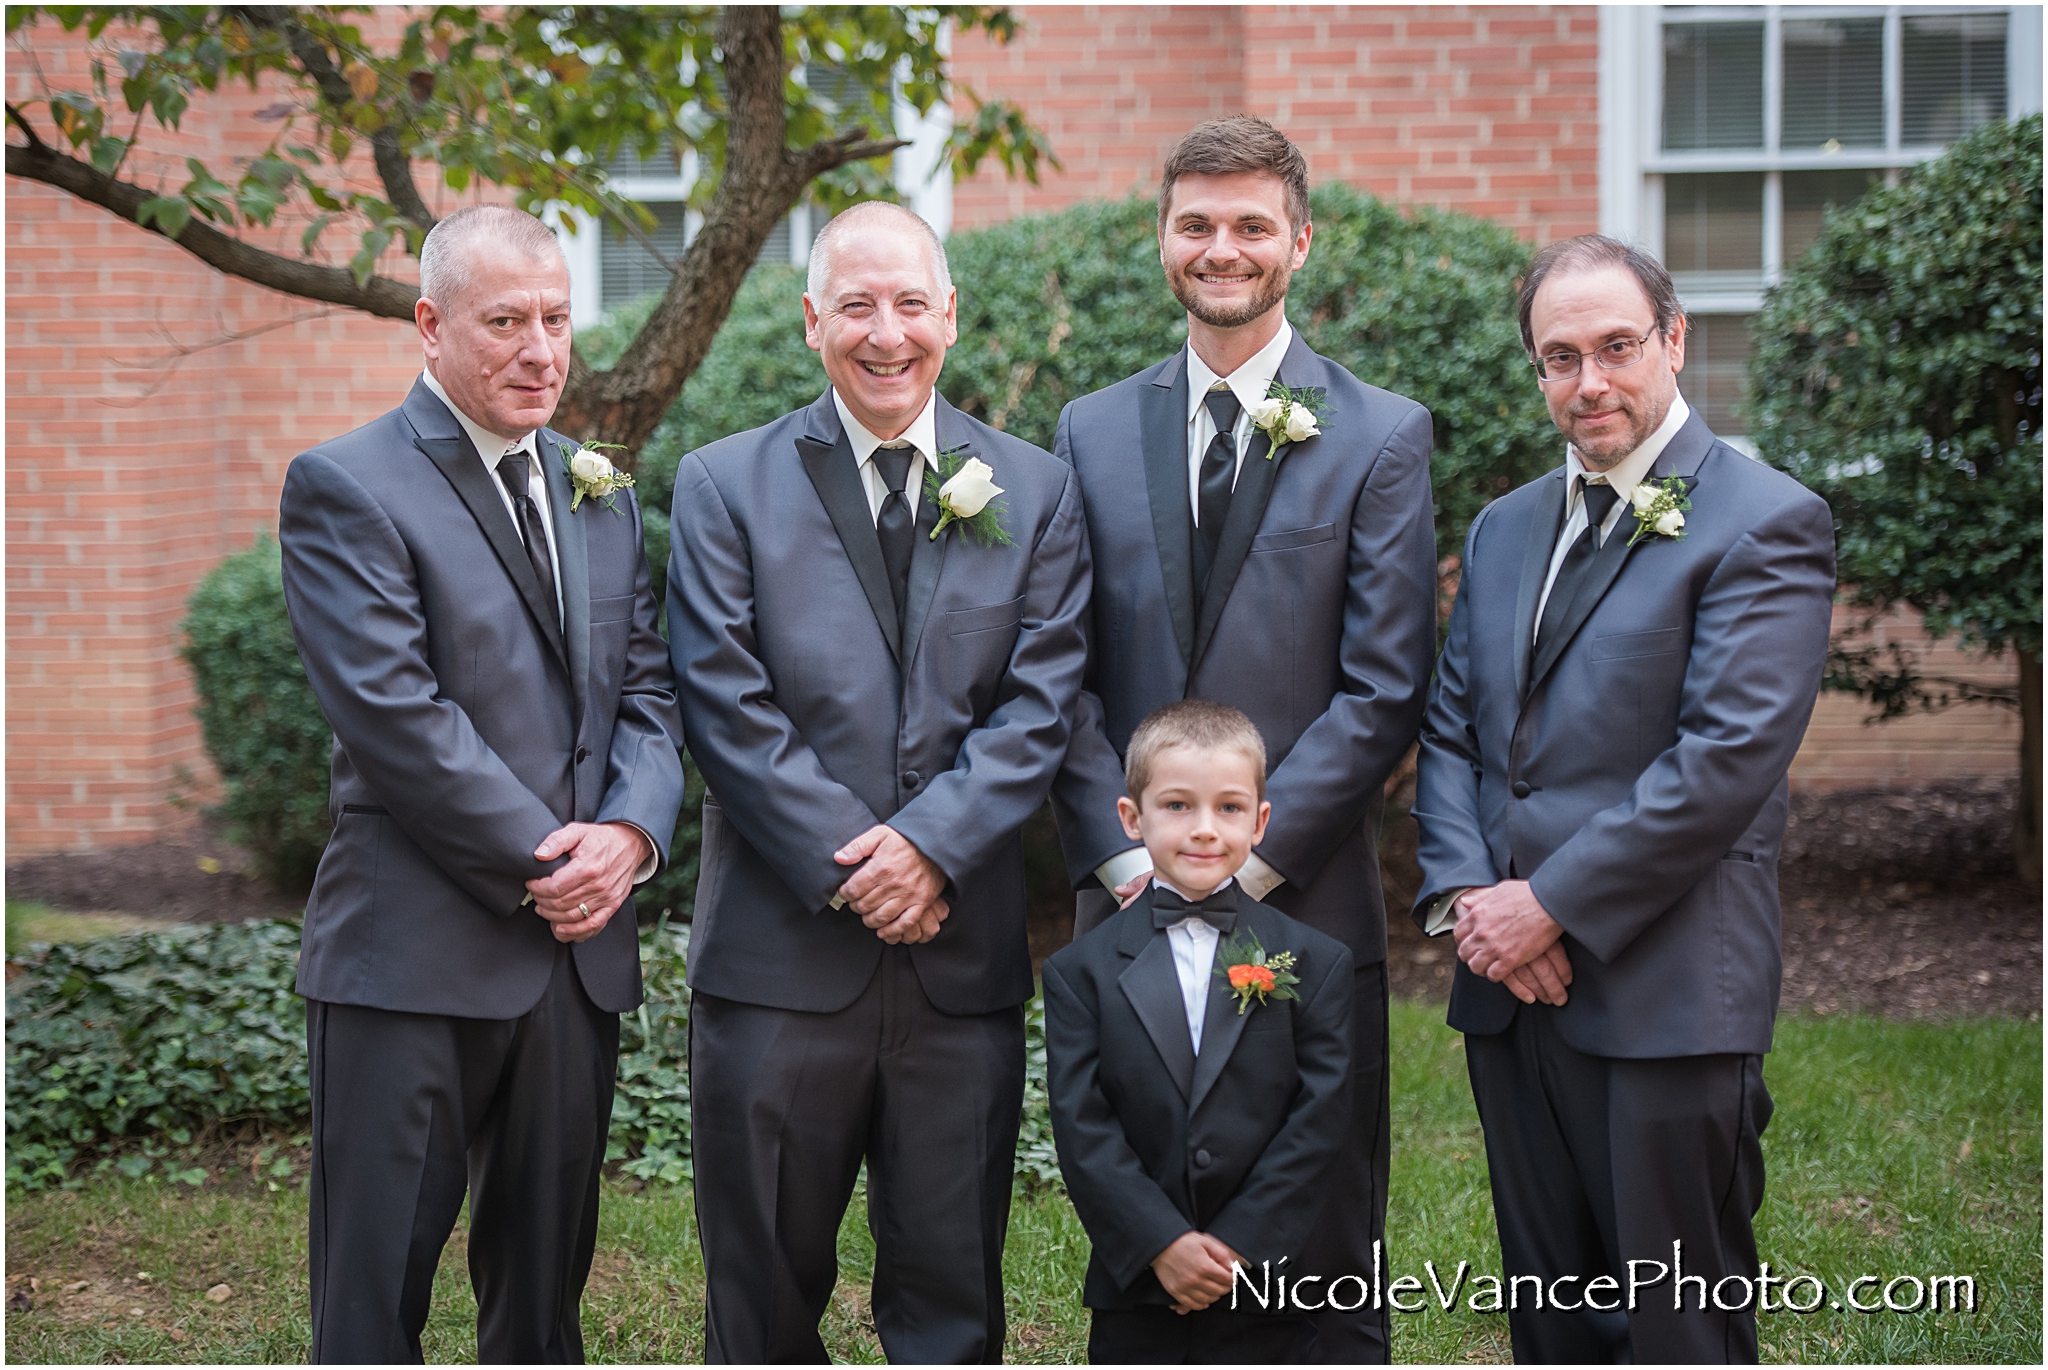 The groom poses with his groomsmen and ring bearer at Third Church, RVA.